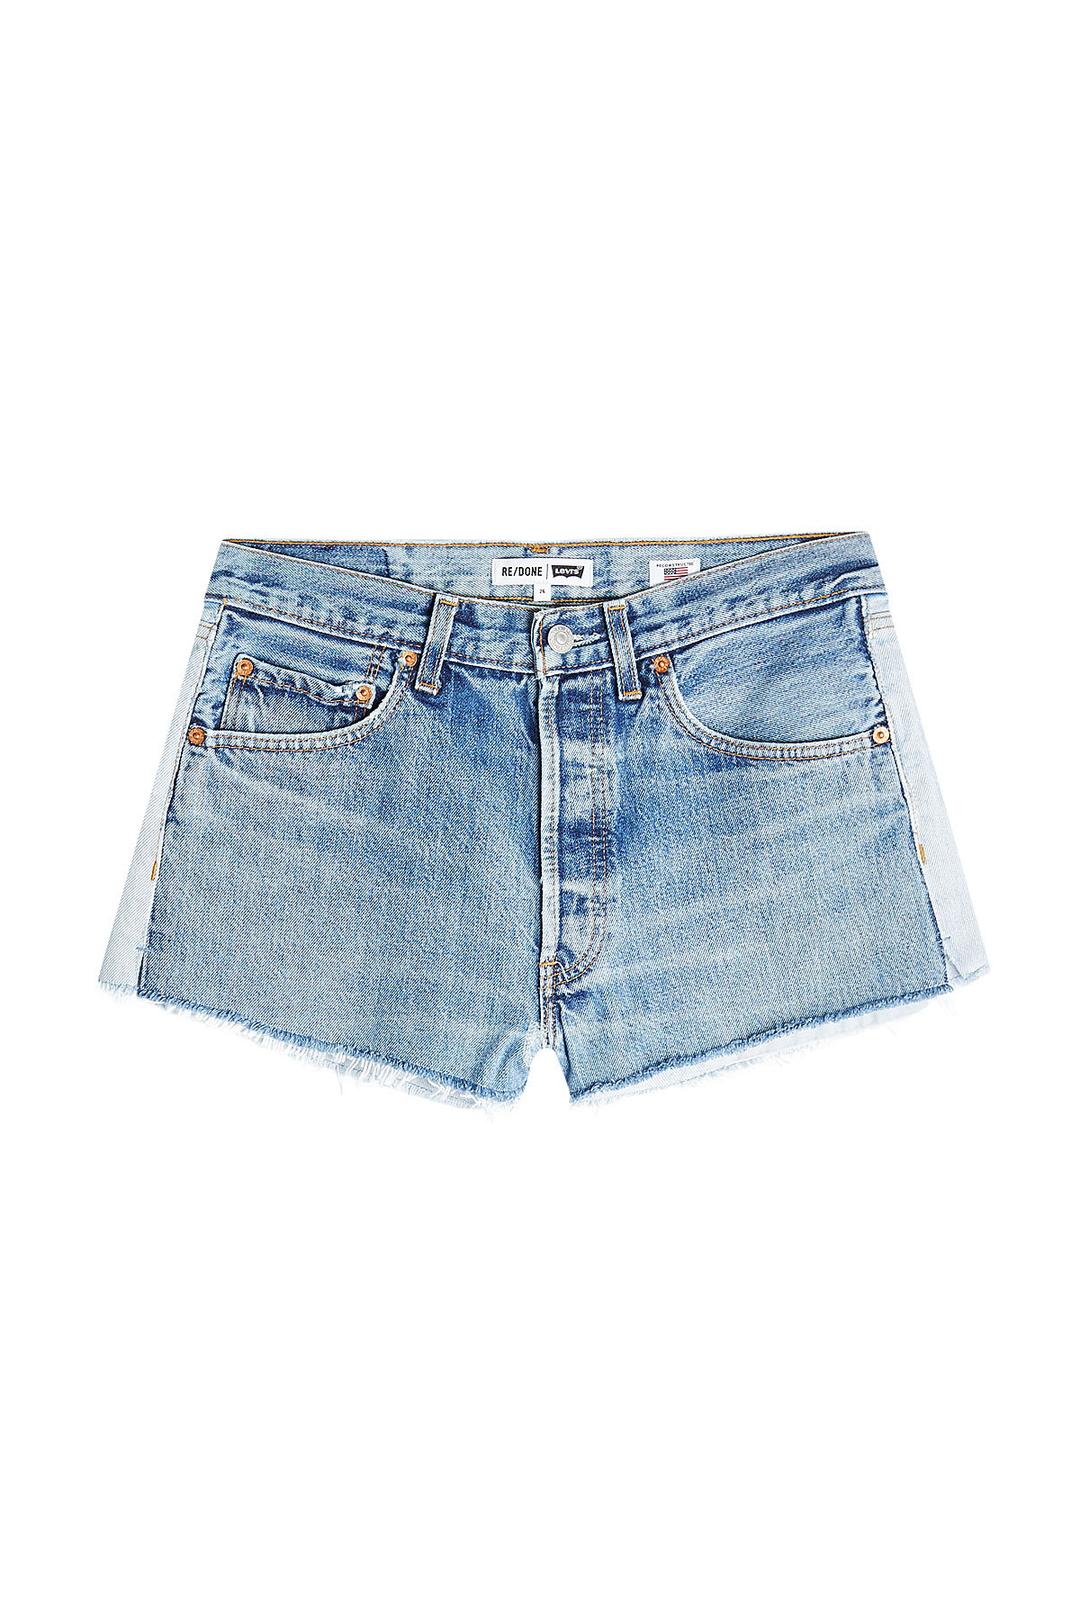 The Cutest Denim Shorts for a Spring Getaway | Who What Wear UK